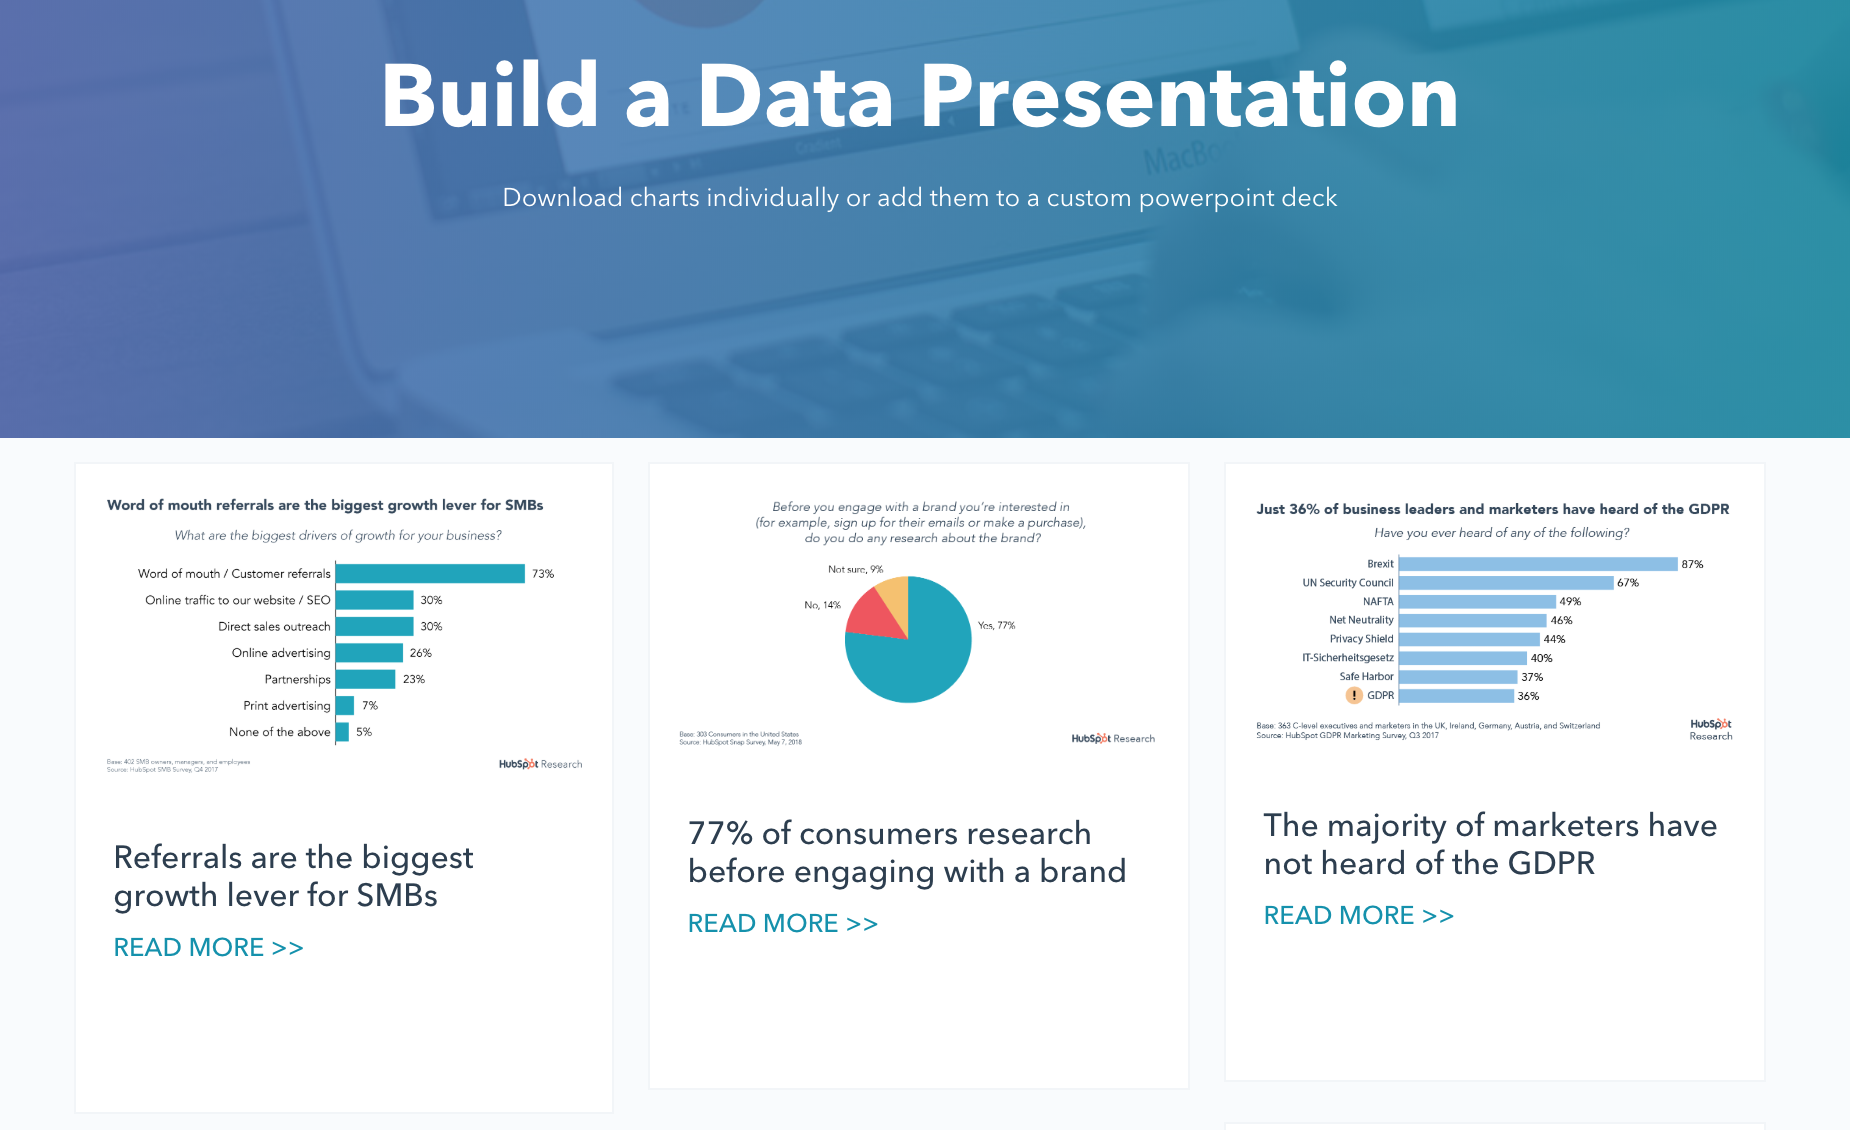 Mimi An at HubSpot Research - "Build a Data Presentation" page